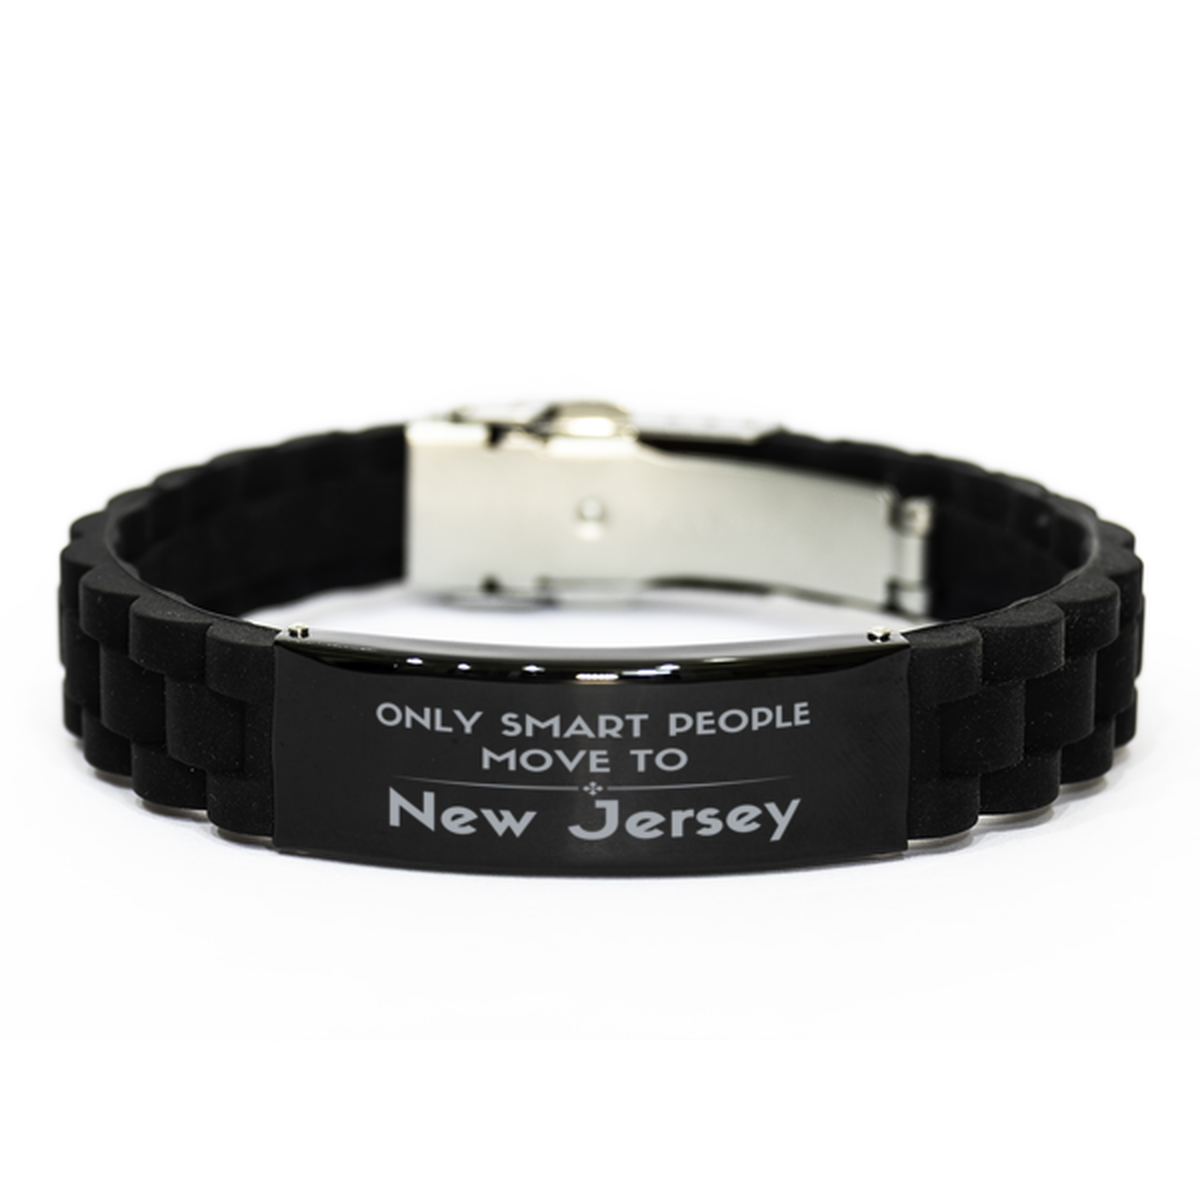 Only smart people move to New Jersey Black Glidelock Clasp Bracelet, Gag Gifts For New Jersey, Move to New Jersey Gifts for Friends Coworker Funny Saying Quote